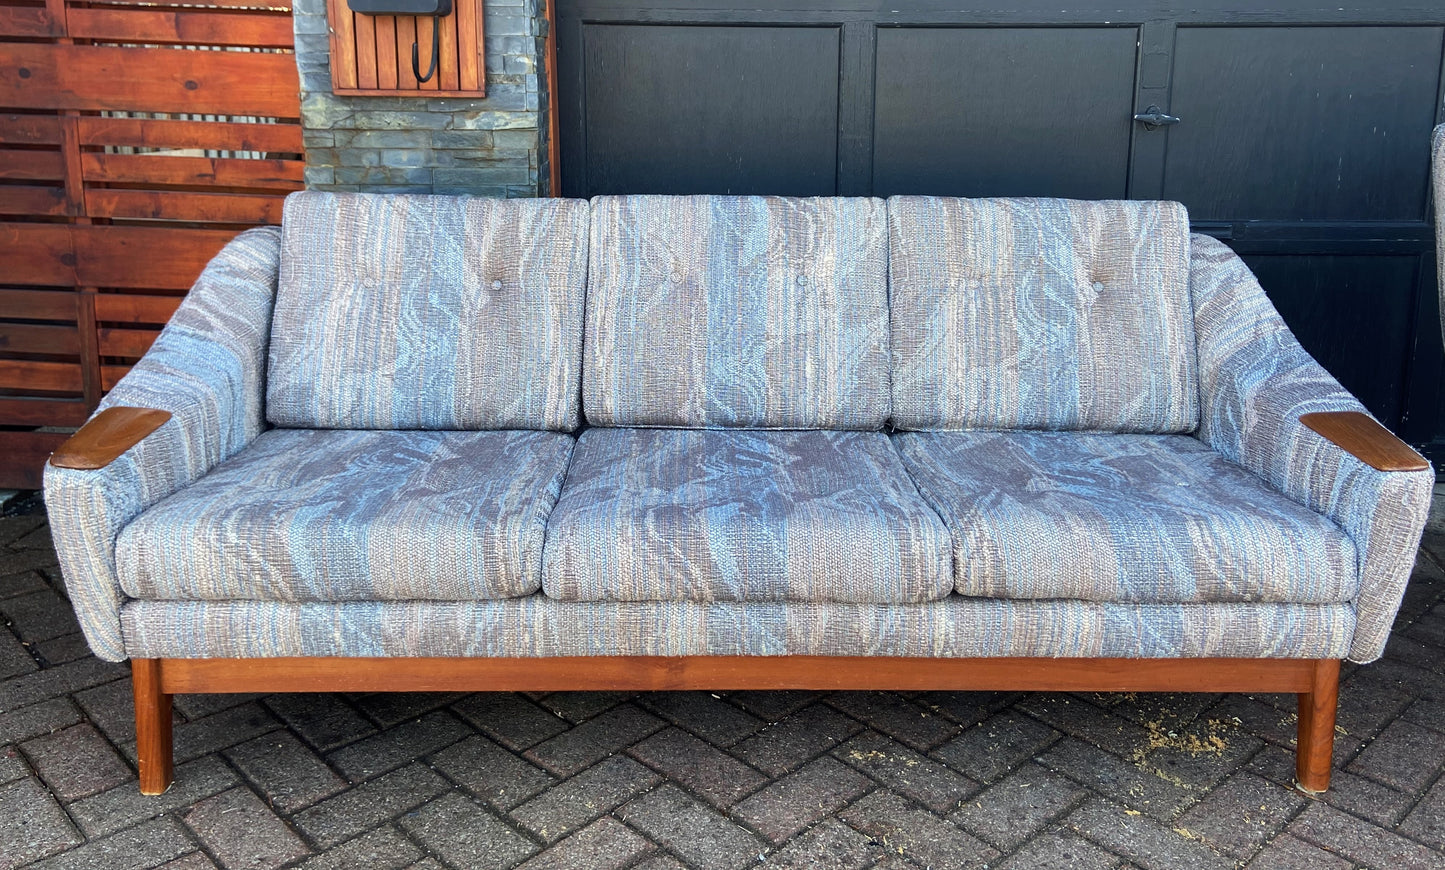 REFINISHED Danish styled MCM Teak Sofa, Lounge Chair and Ottoman